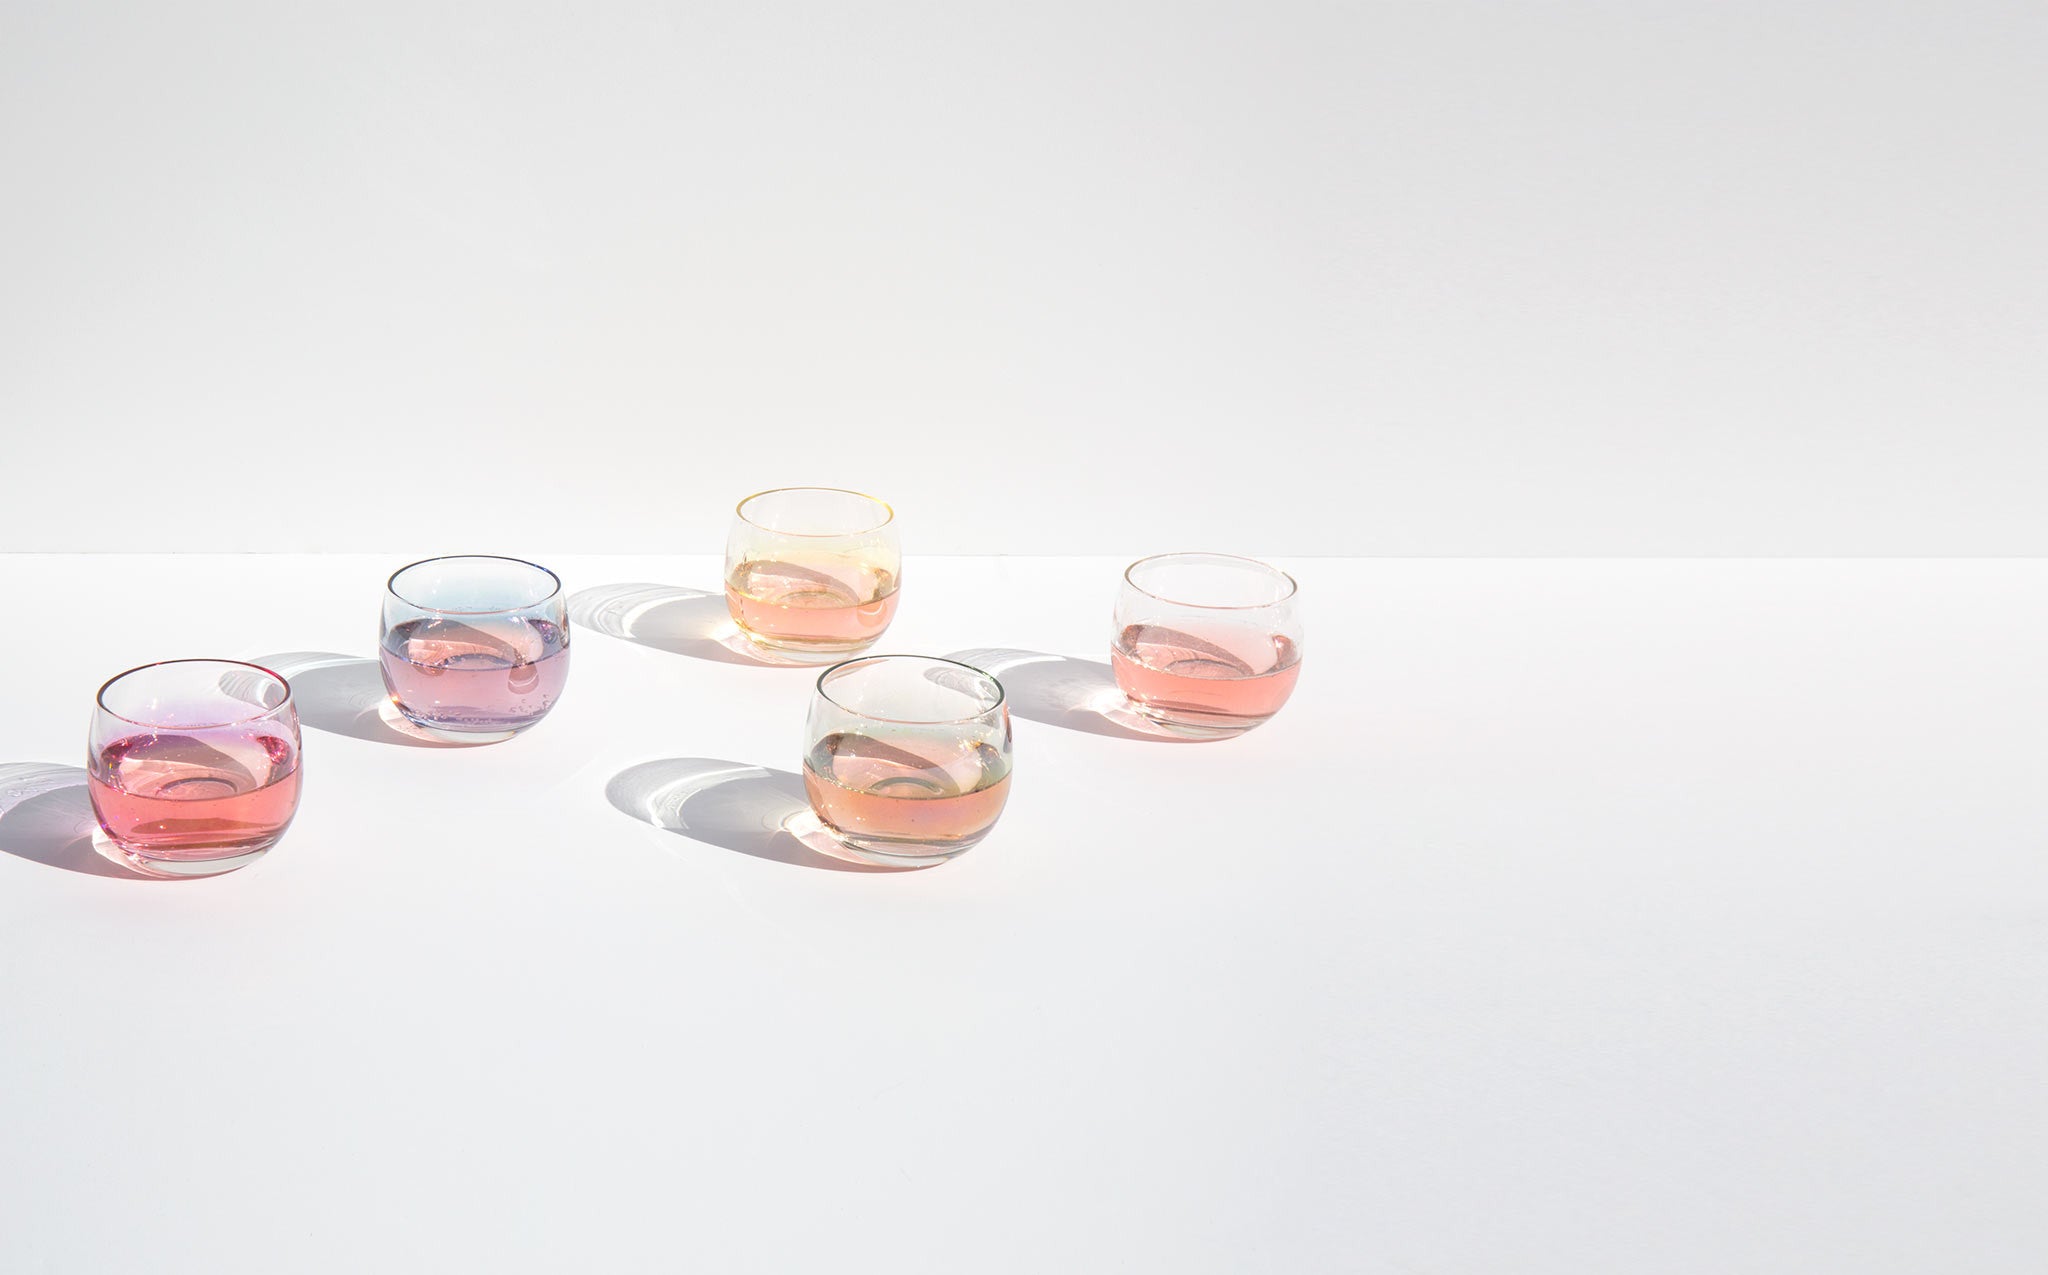 Iridescent Roly Poly Cordial Glasses